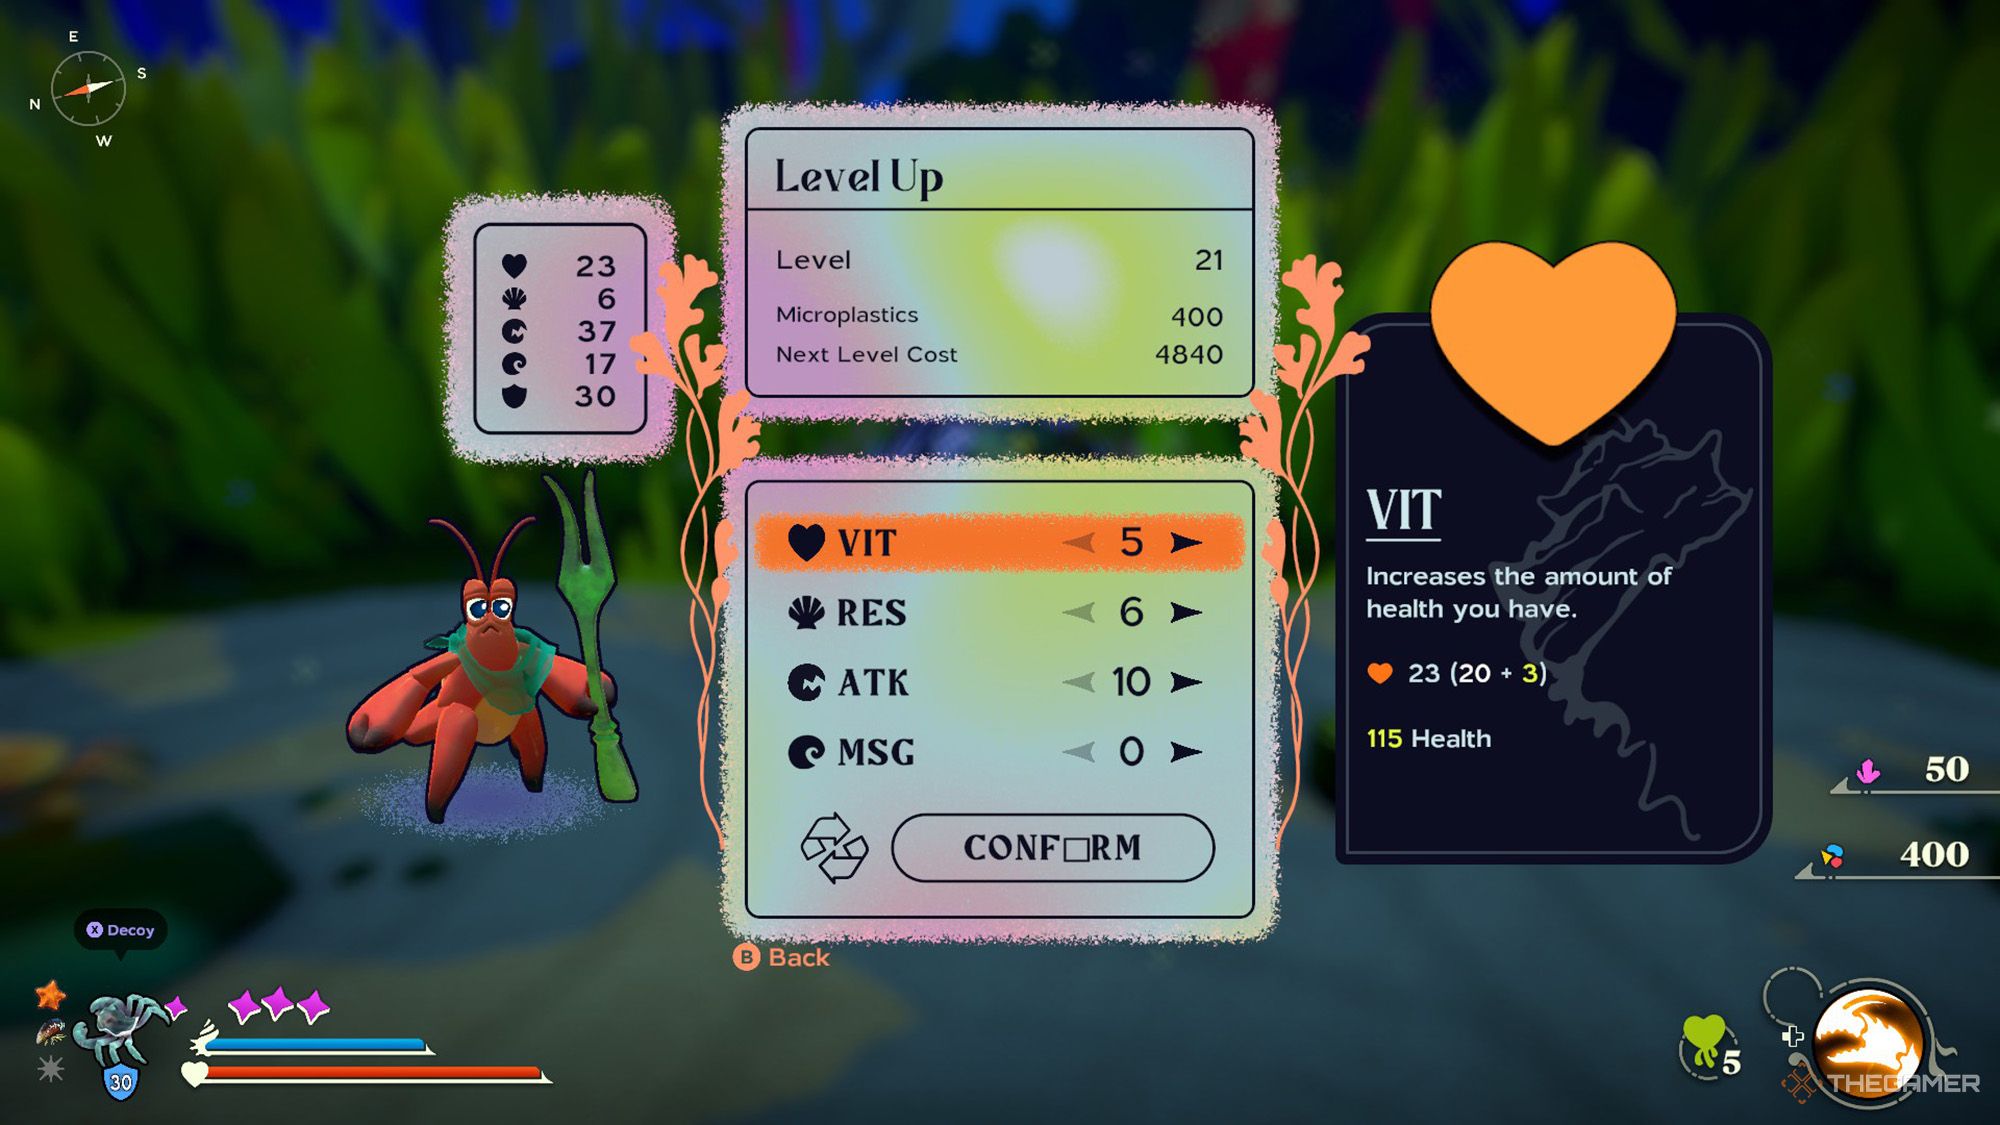 Another Crab's Treasure - Level up screen displays Kril's stats